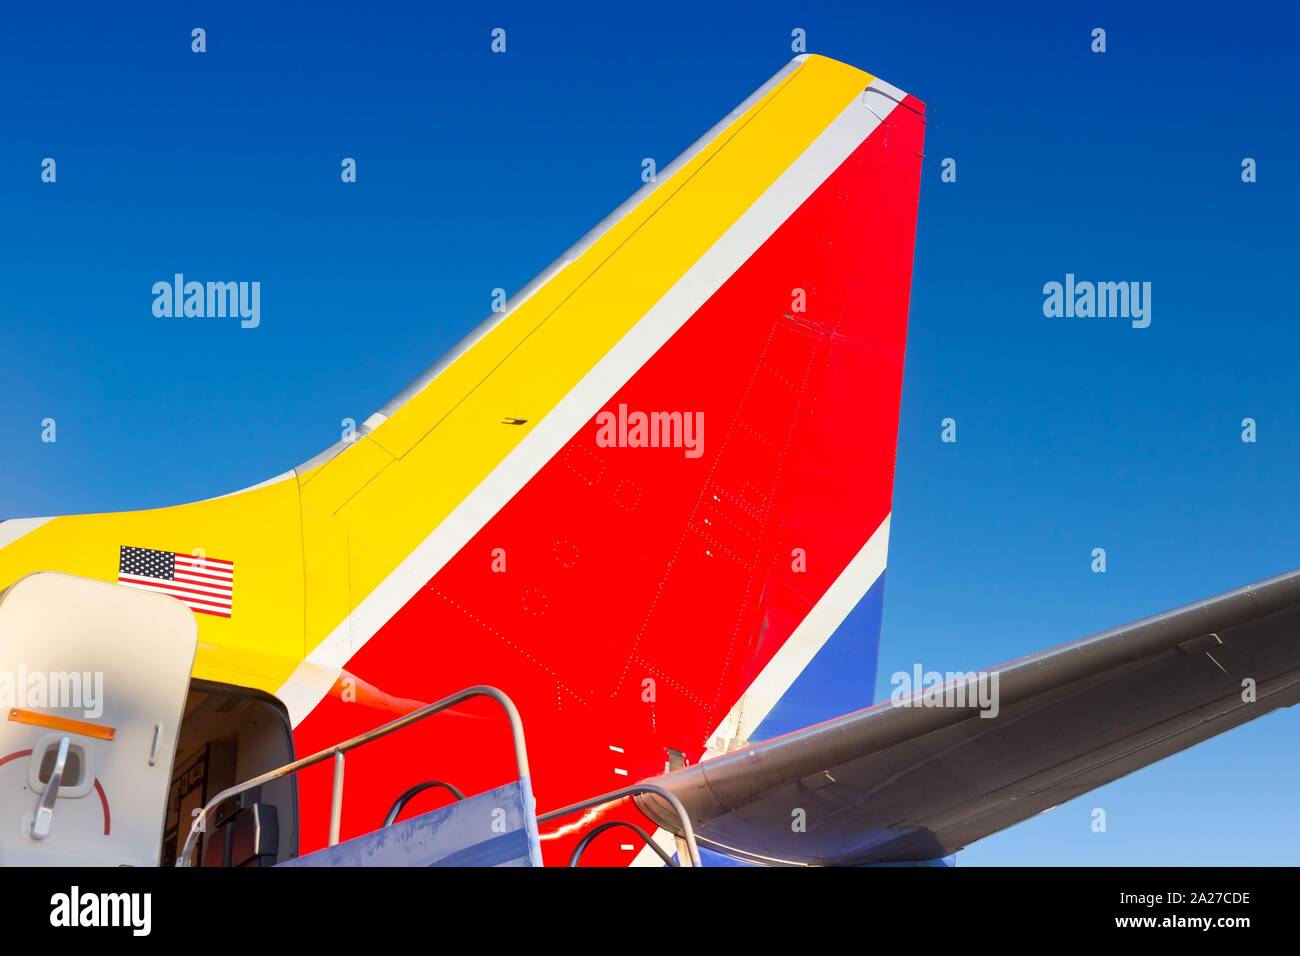 Burbank, California – April 10, 2019: Tail of a Southwest Airlines Boeing 737-700 airplane at Burbank airport (BUR) in California. | usage worldwide Stock Photo